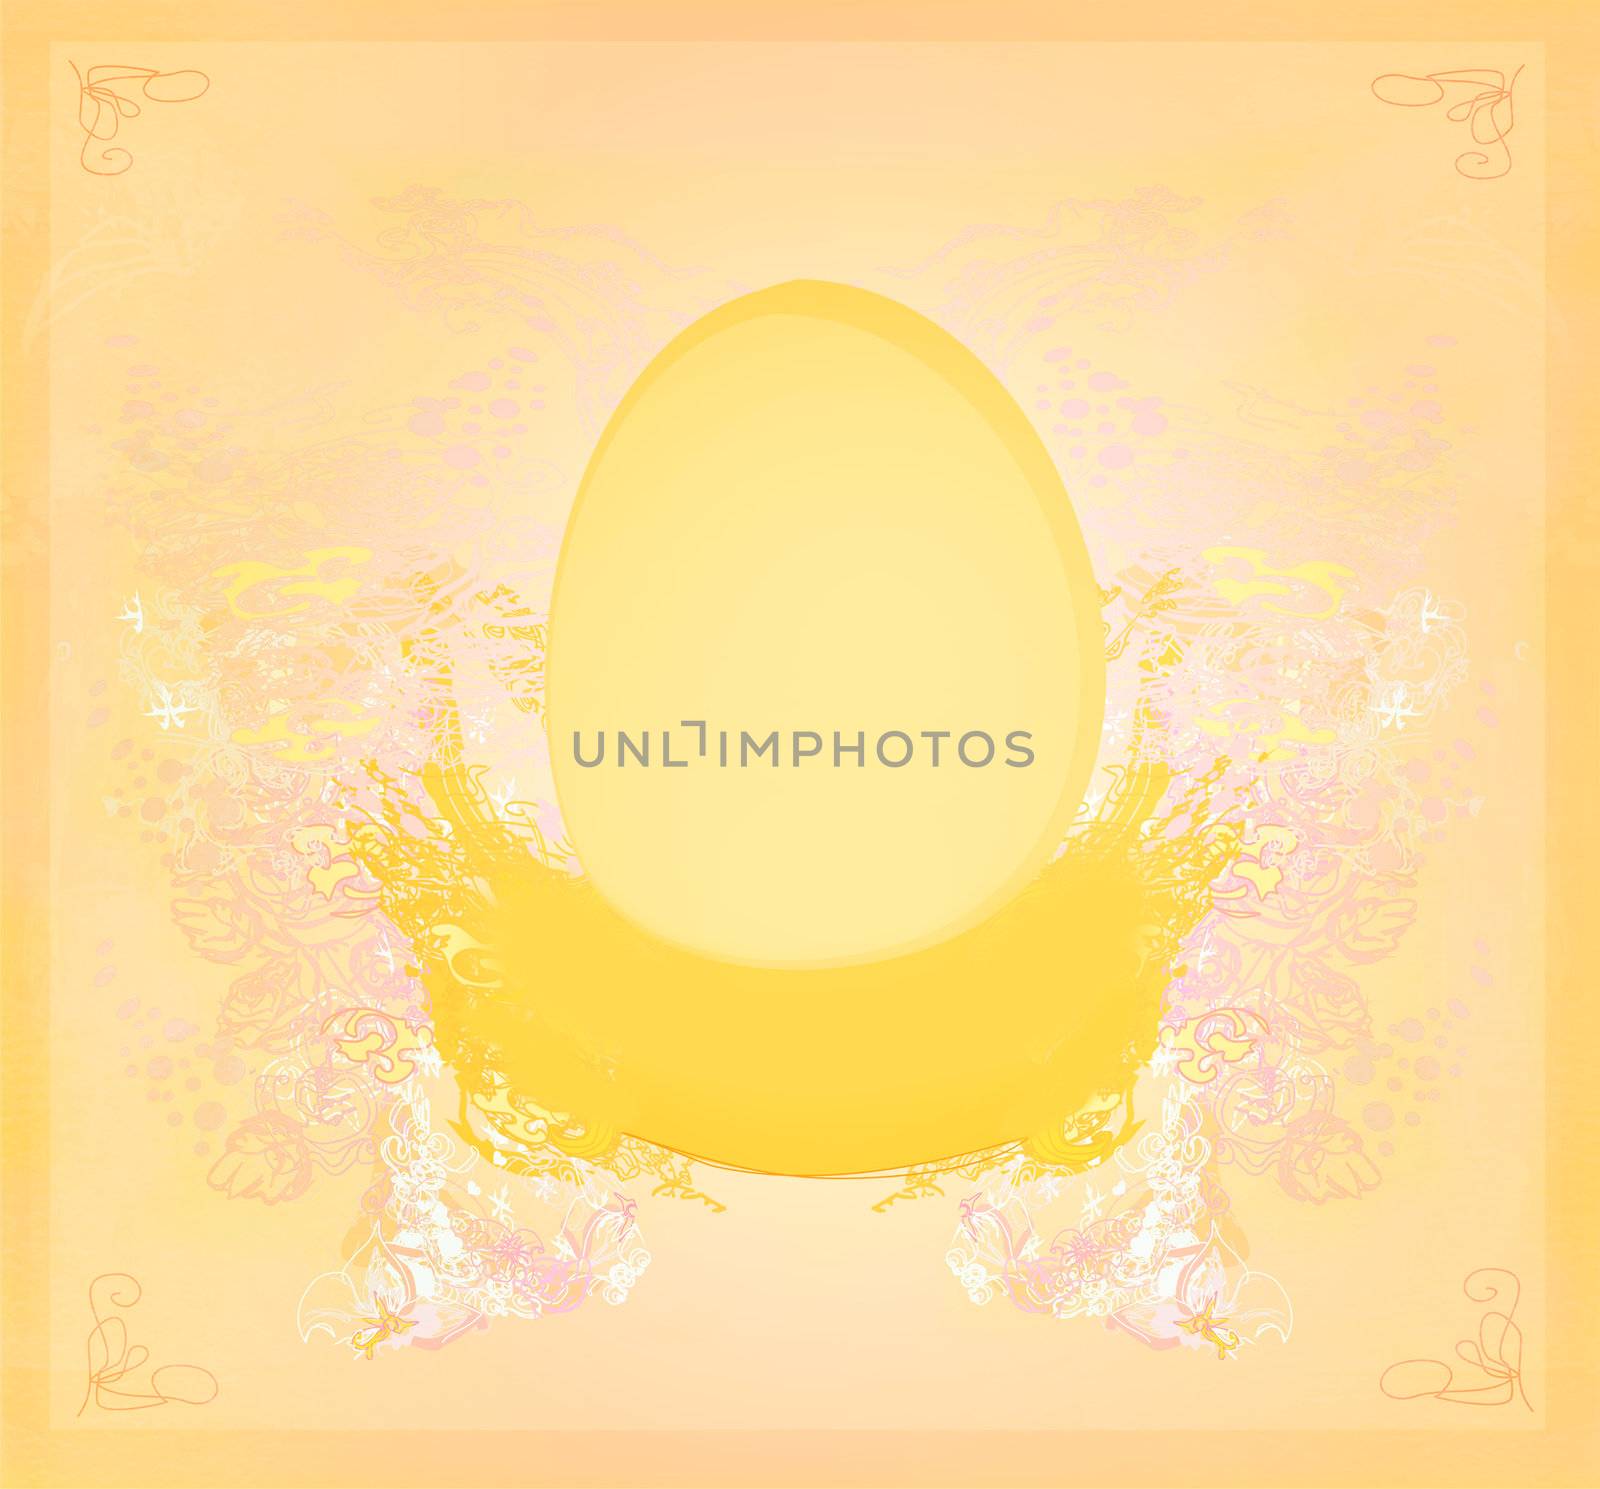 Easter Egg On Grunge Background by JackyBrown